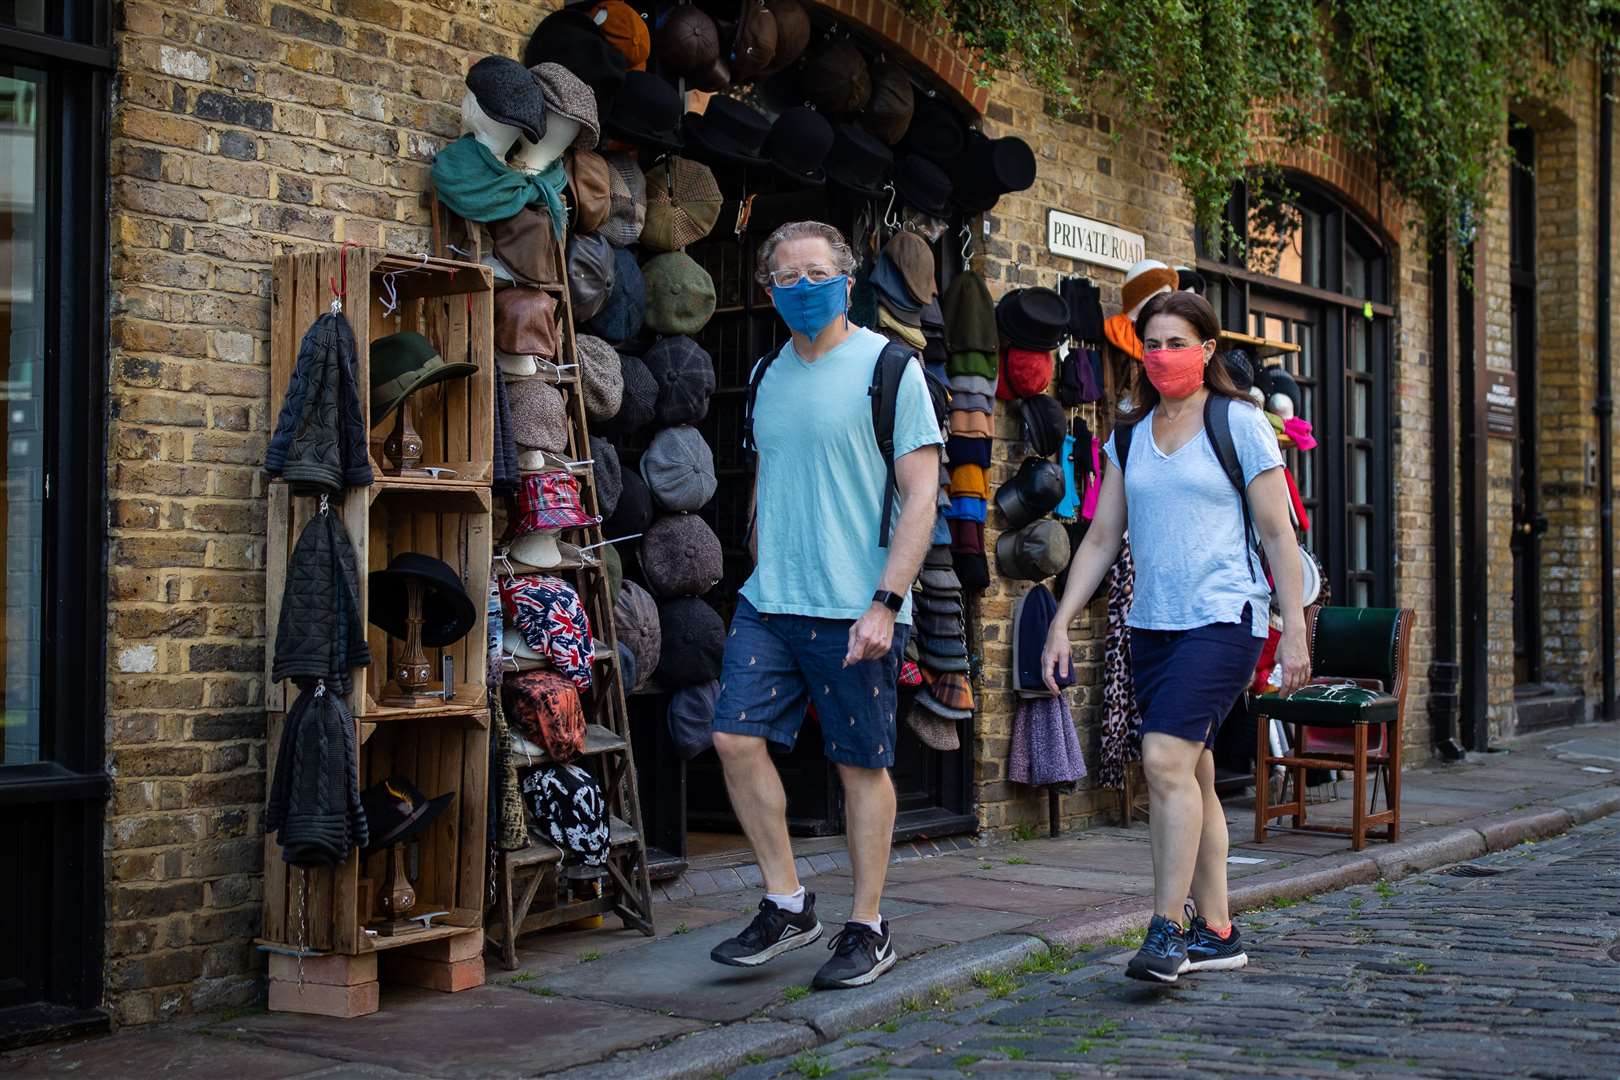 Two people wearing face coverings walk past a shop in Camden Market (Aaron Chown/PA)